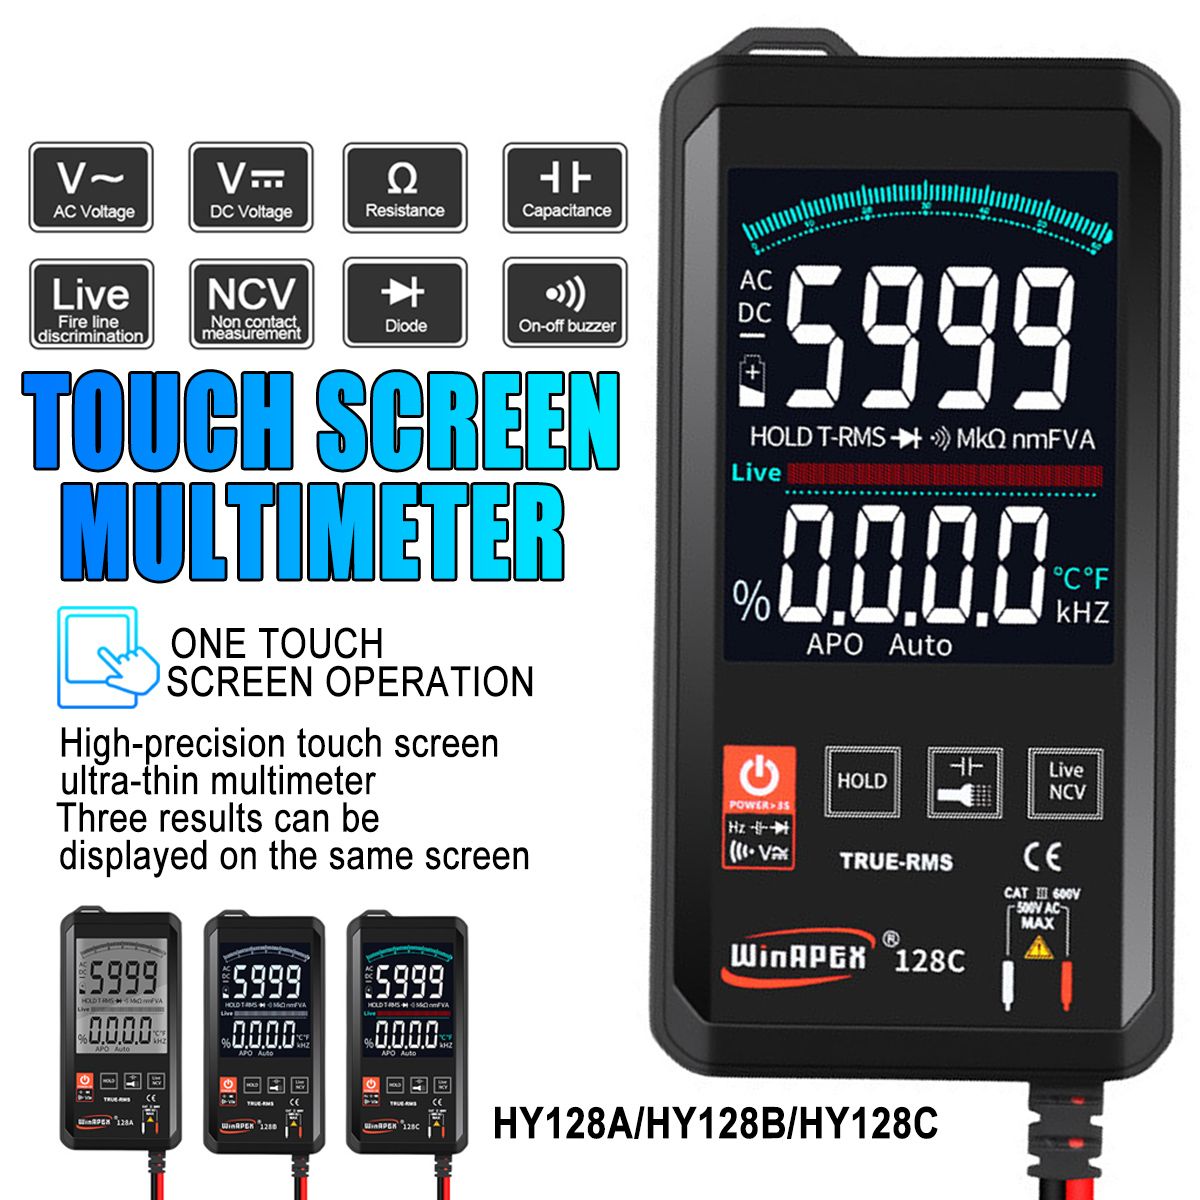 HY128ABC-Digital-Multimeter-Touch-DCAC-Professional-Analog-Tester-True-RMS-Multimeter-1731418